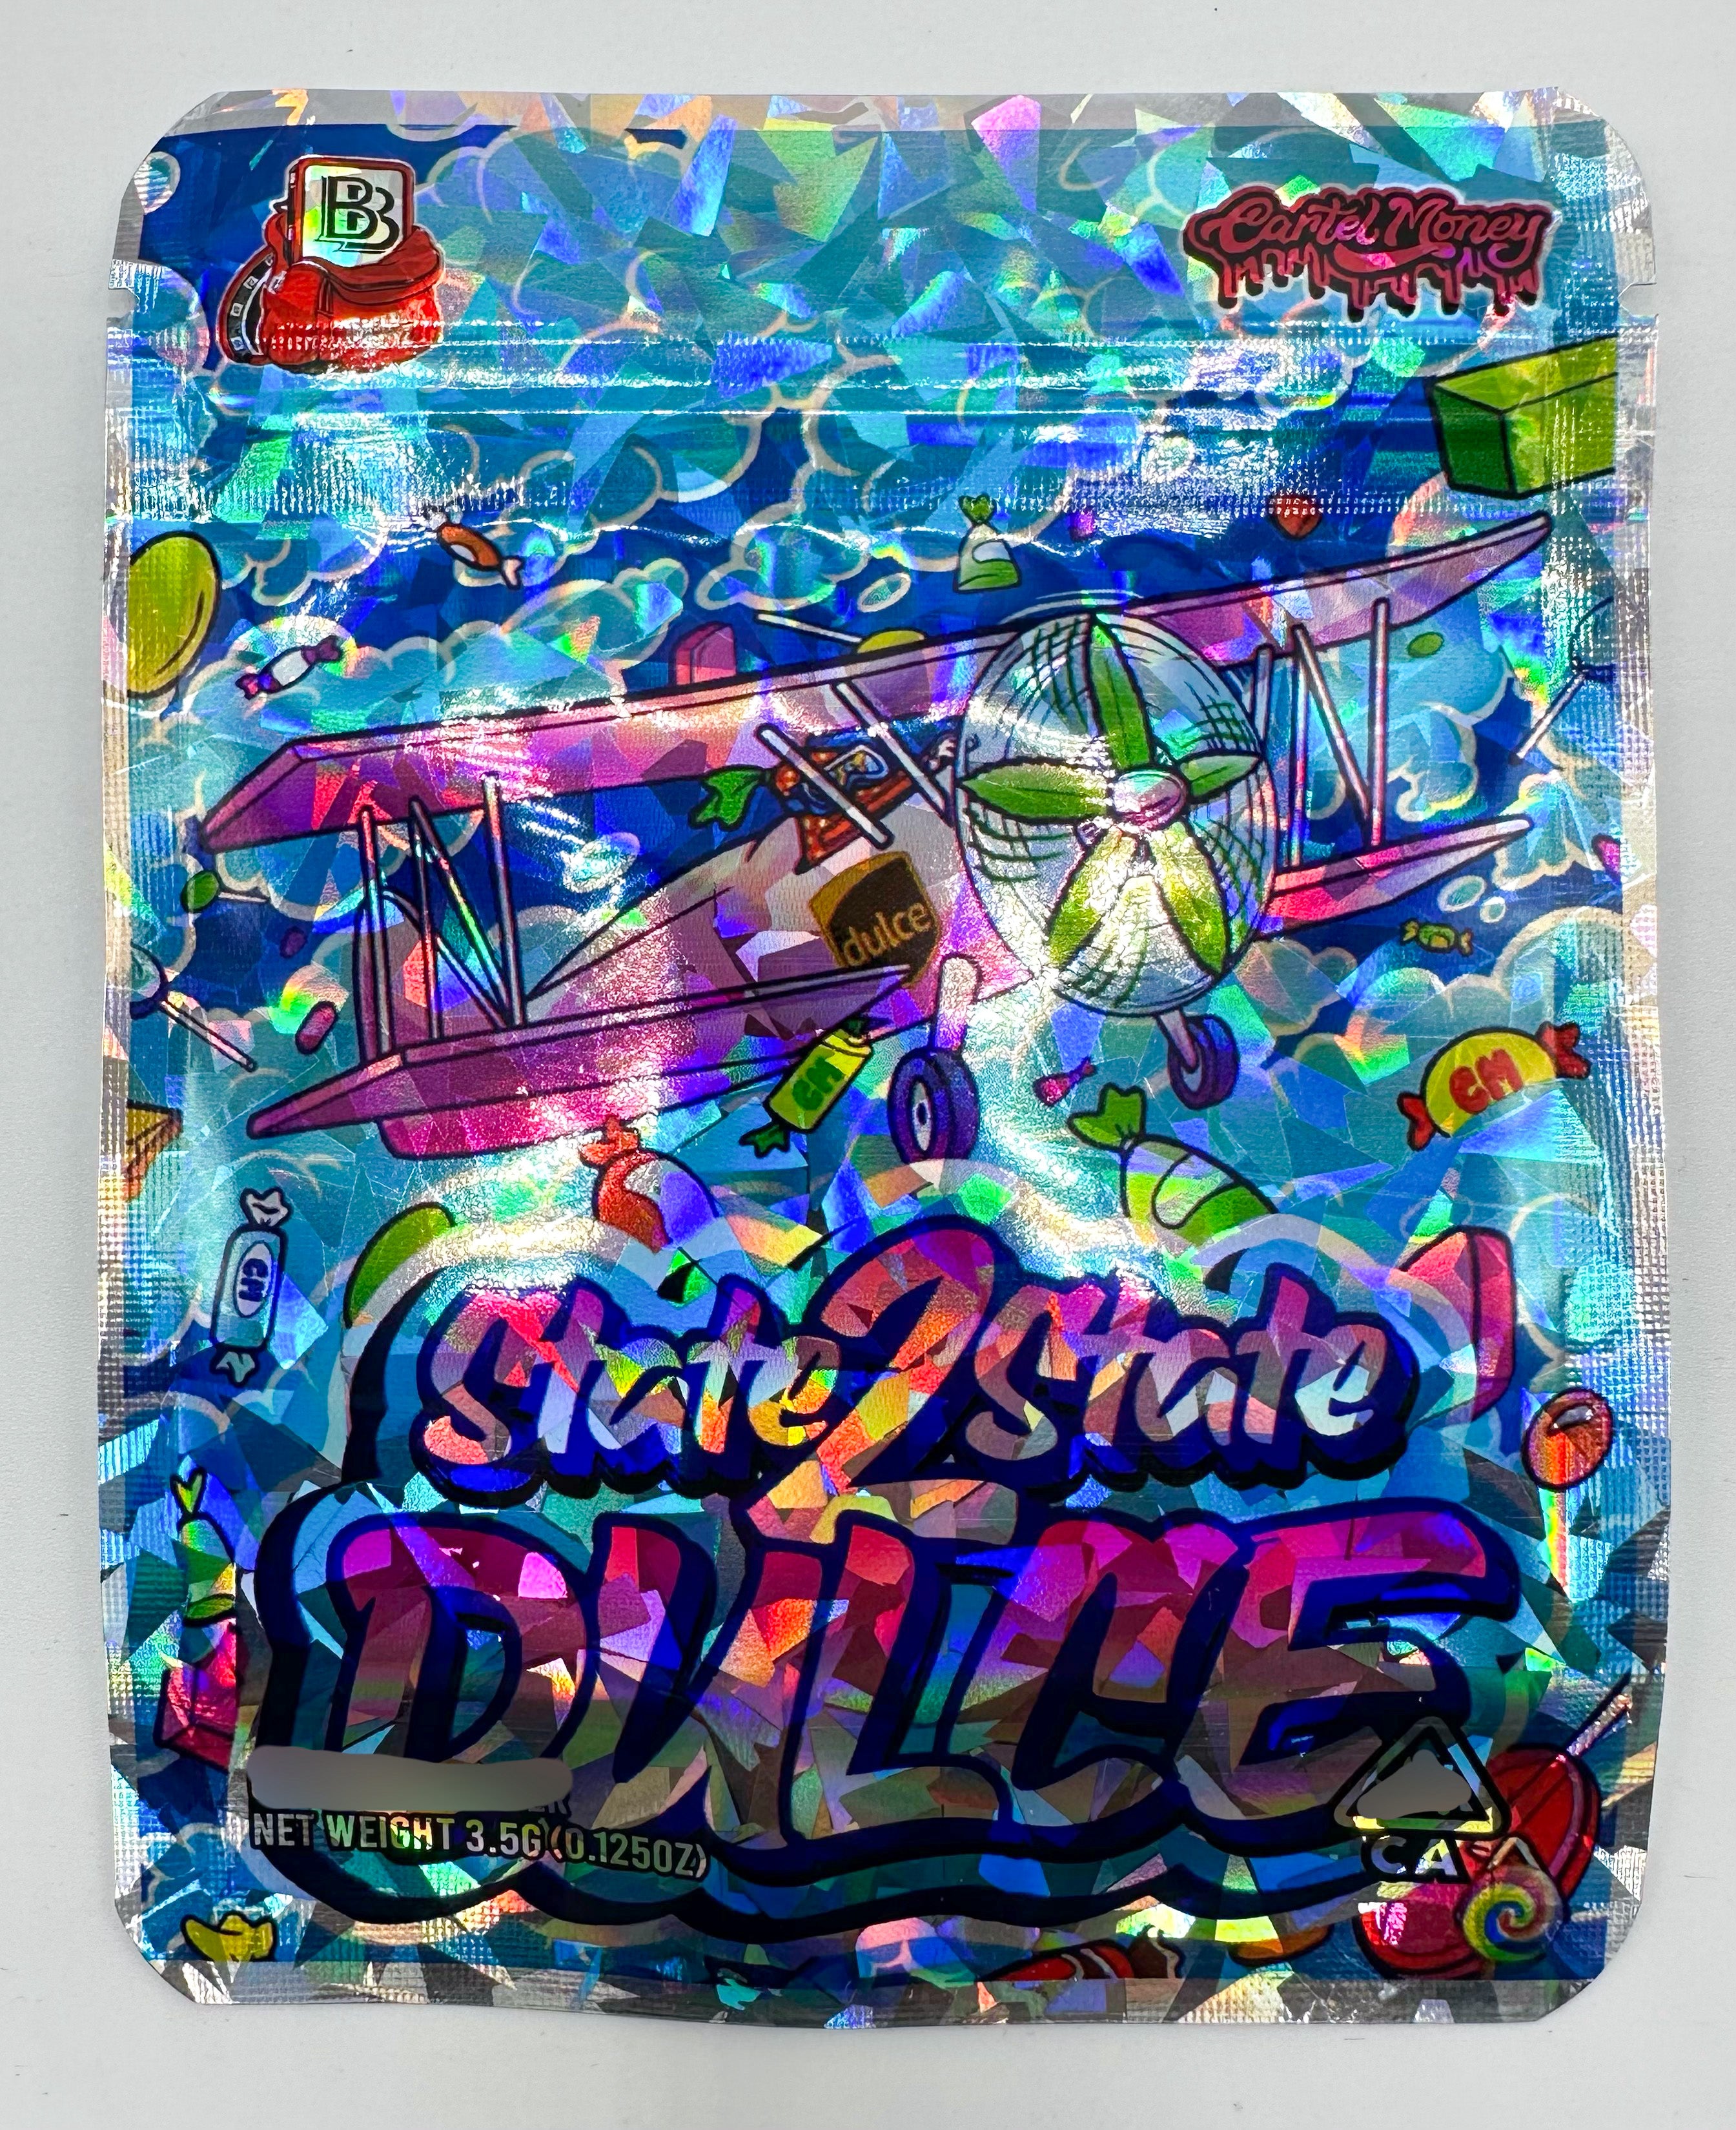 State to State Dulce 3.5g Mylar bags